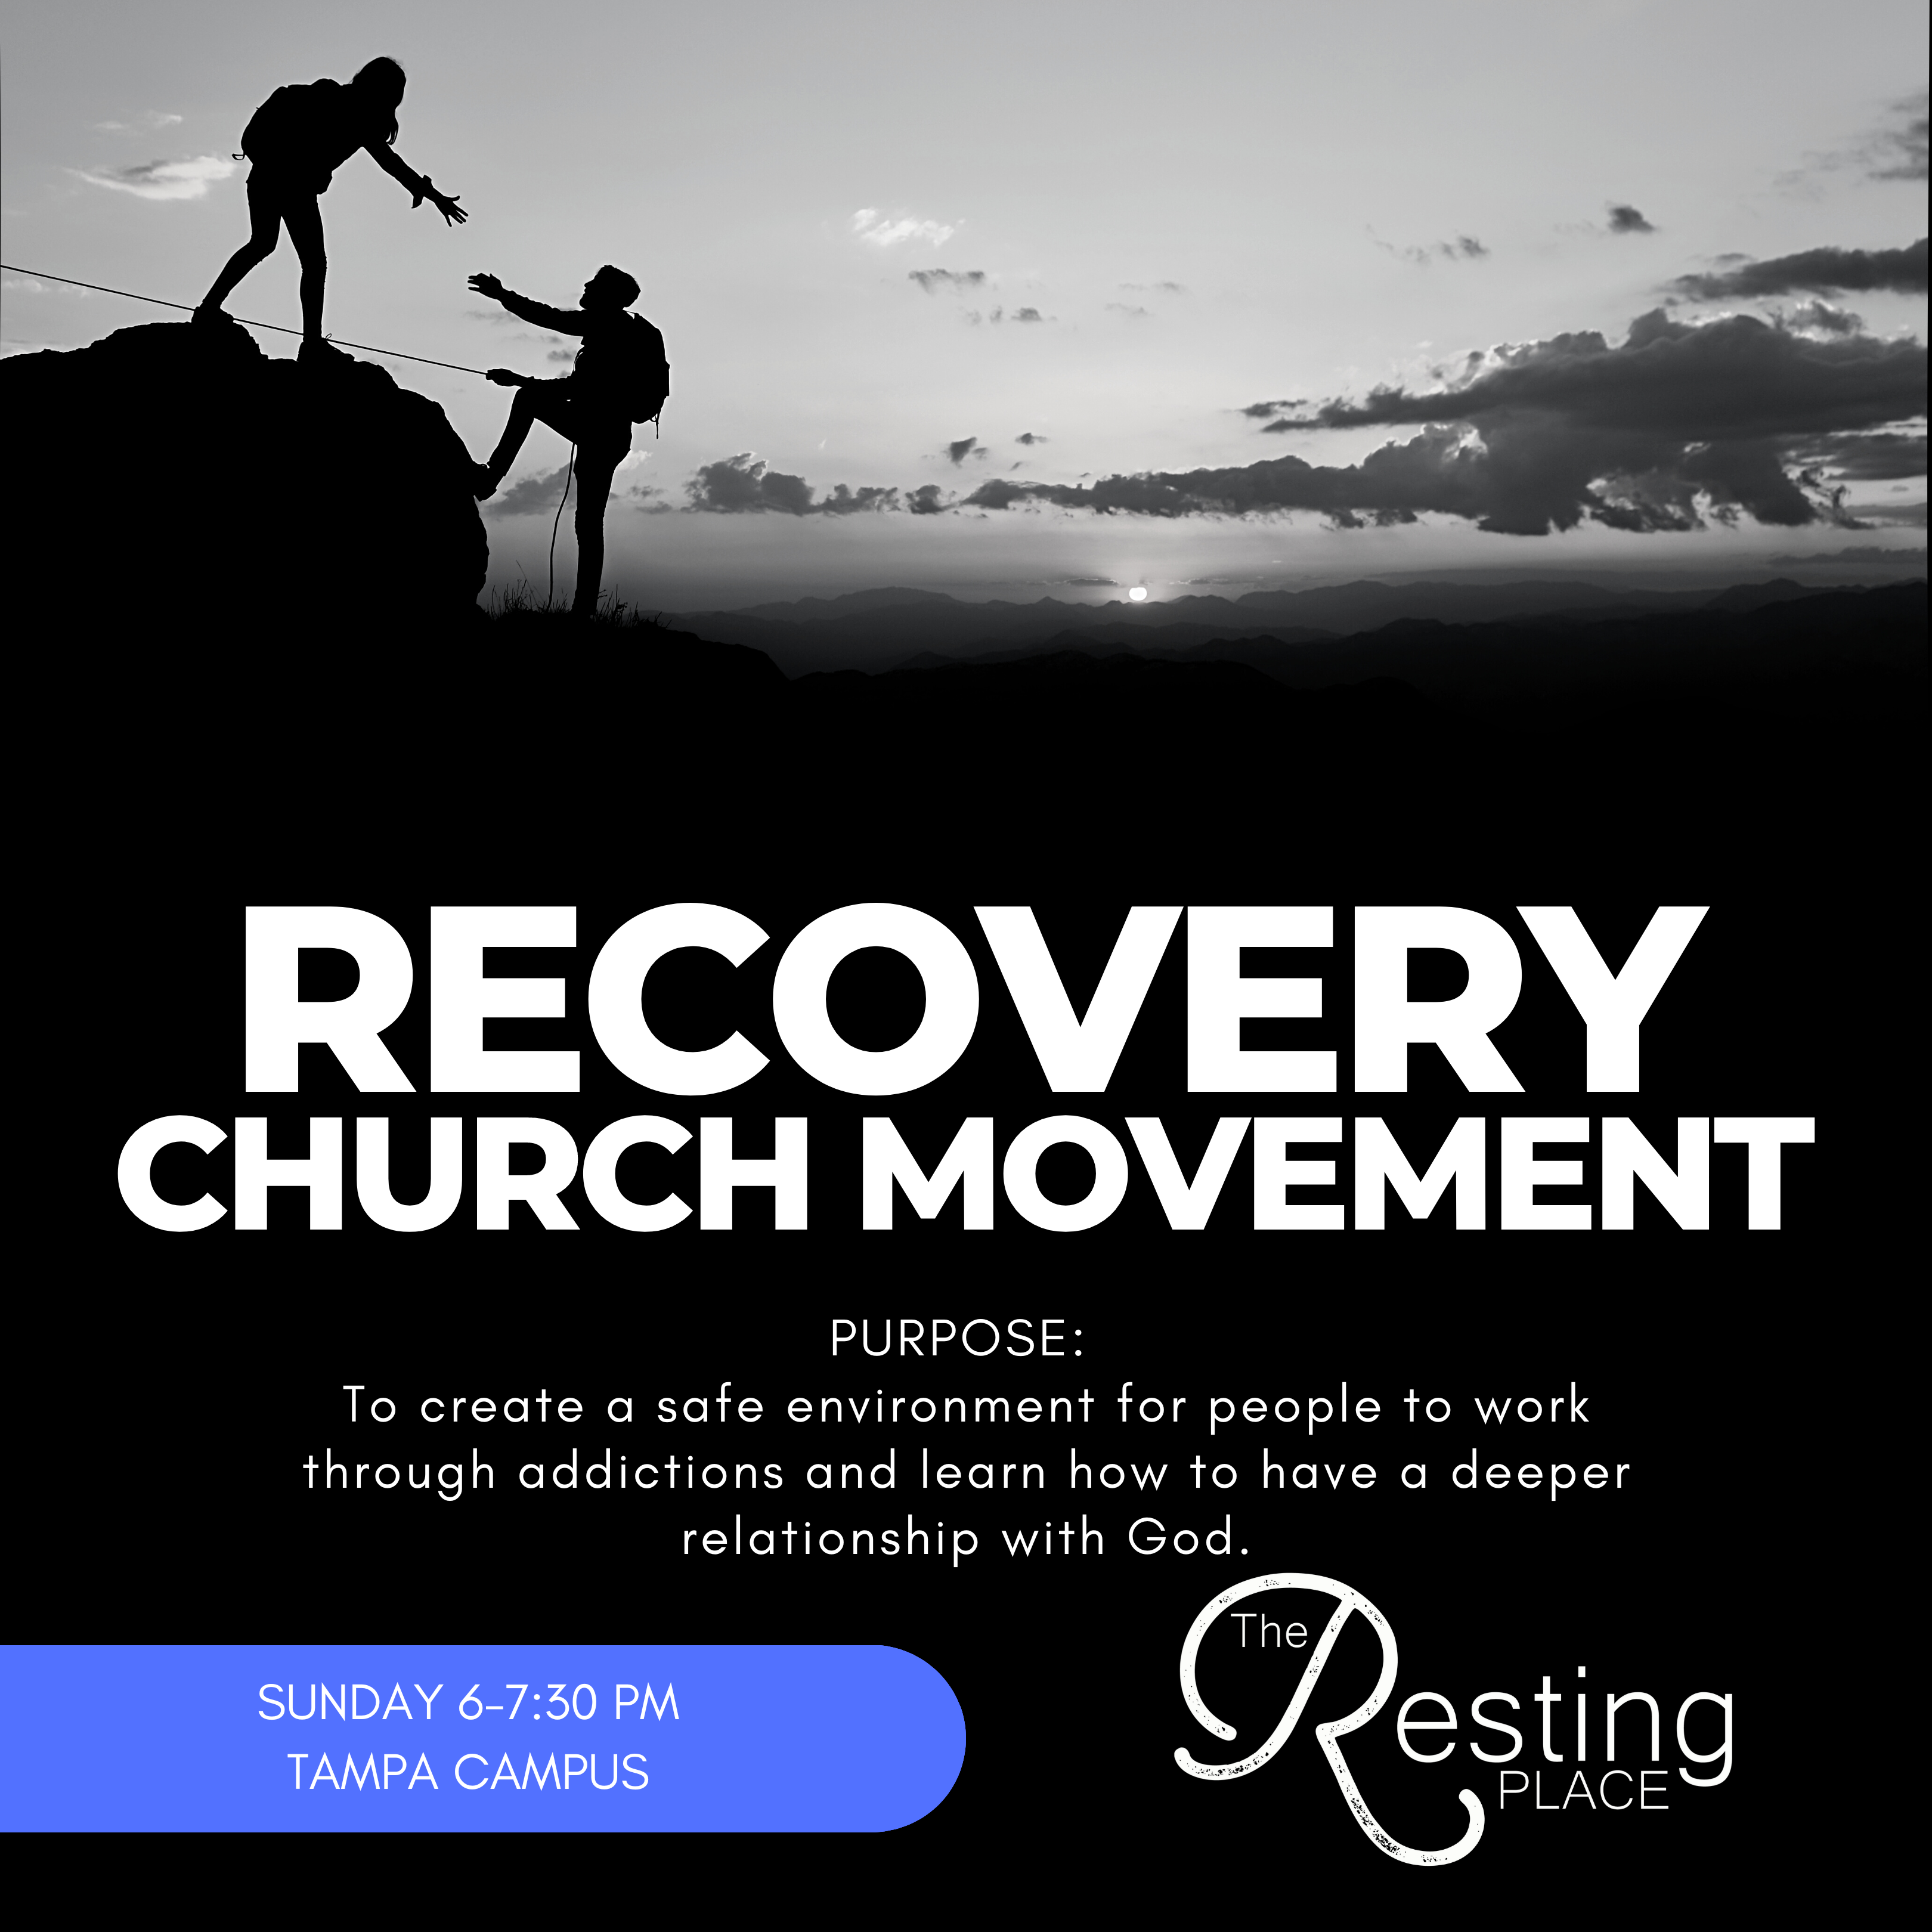 Recovery Church Movement for Substance Abuse Support